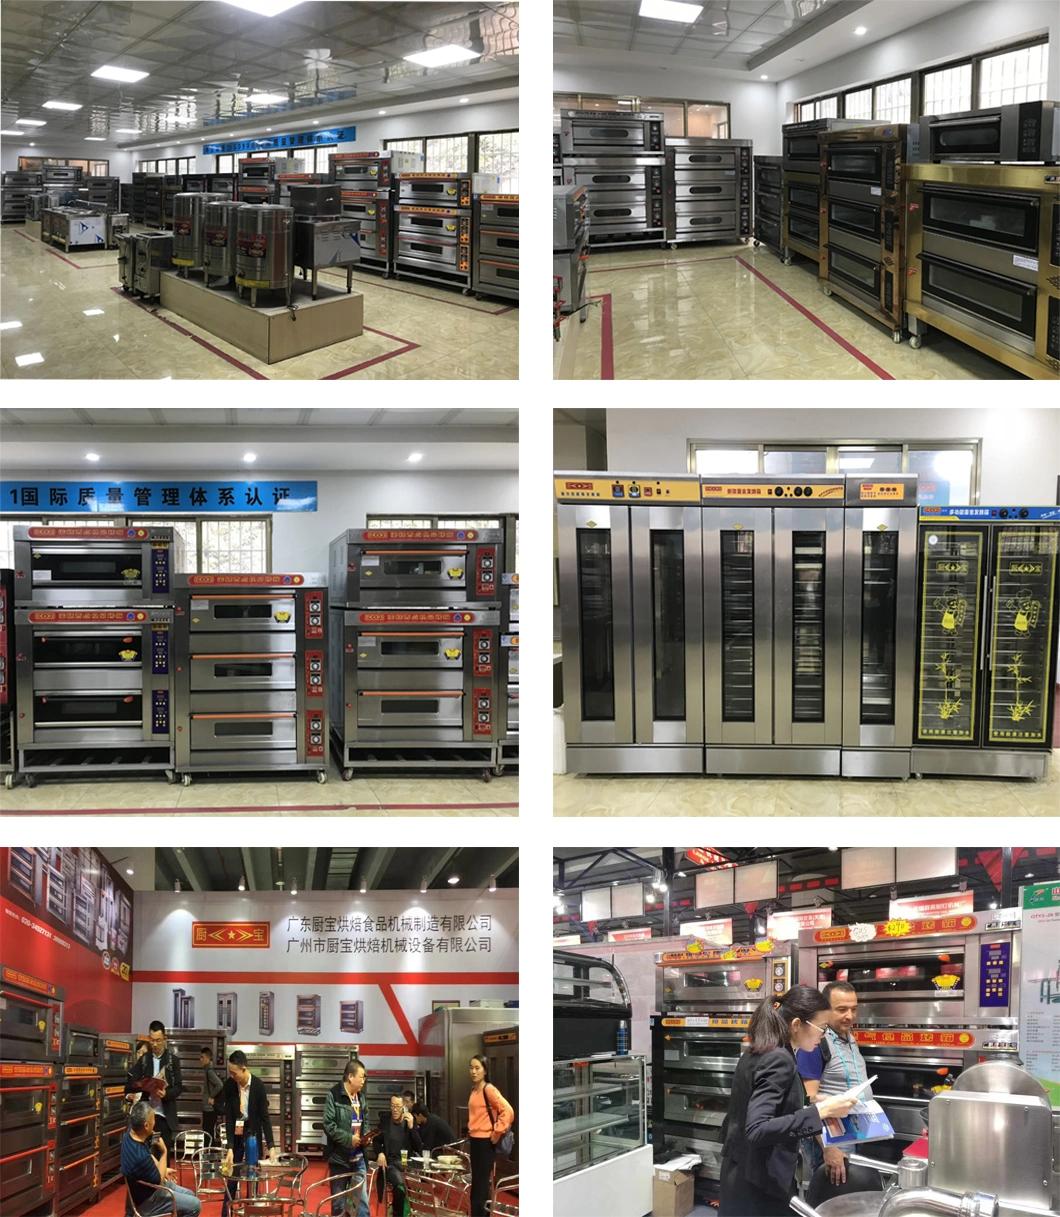 Commercial Kitchen 1 Deck 2 Trays Gas Oven for Baking Equipment Bakery Machine Food machinery Bread Machine Equiped with Timer (3% Discount)